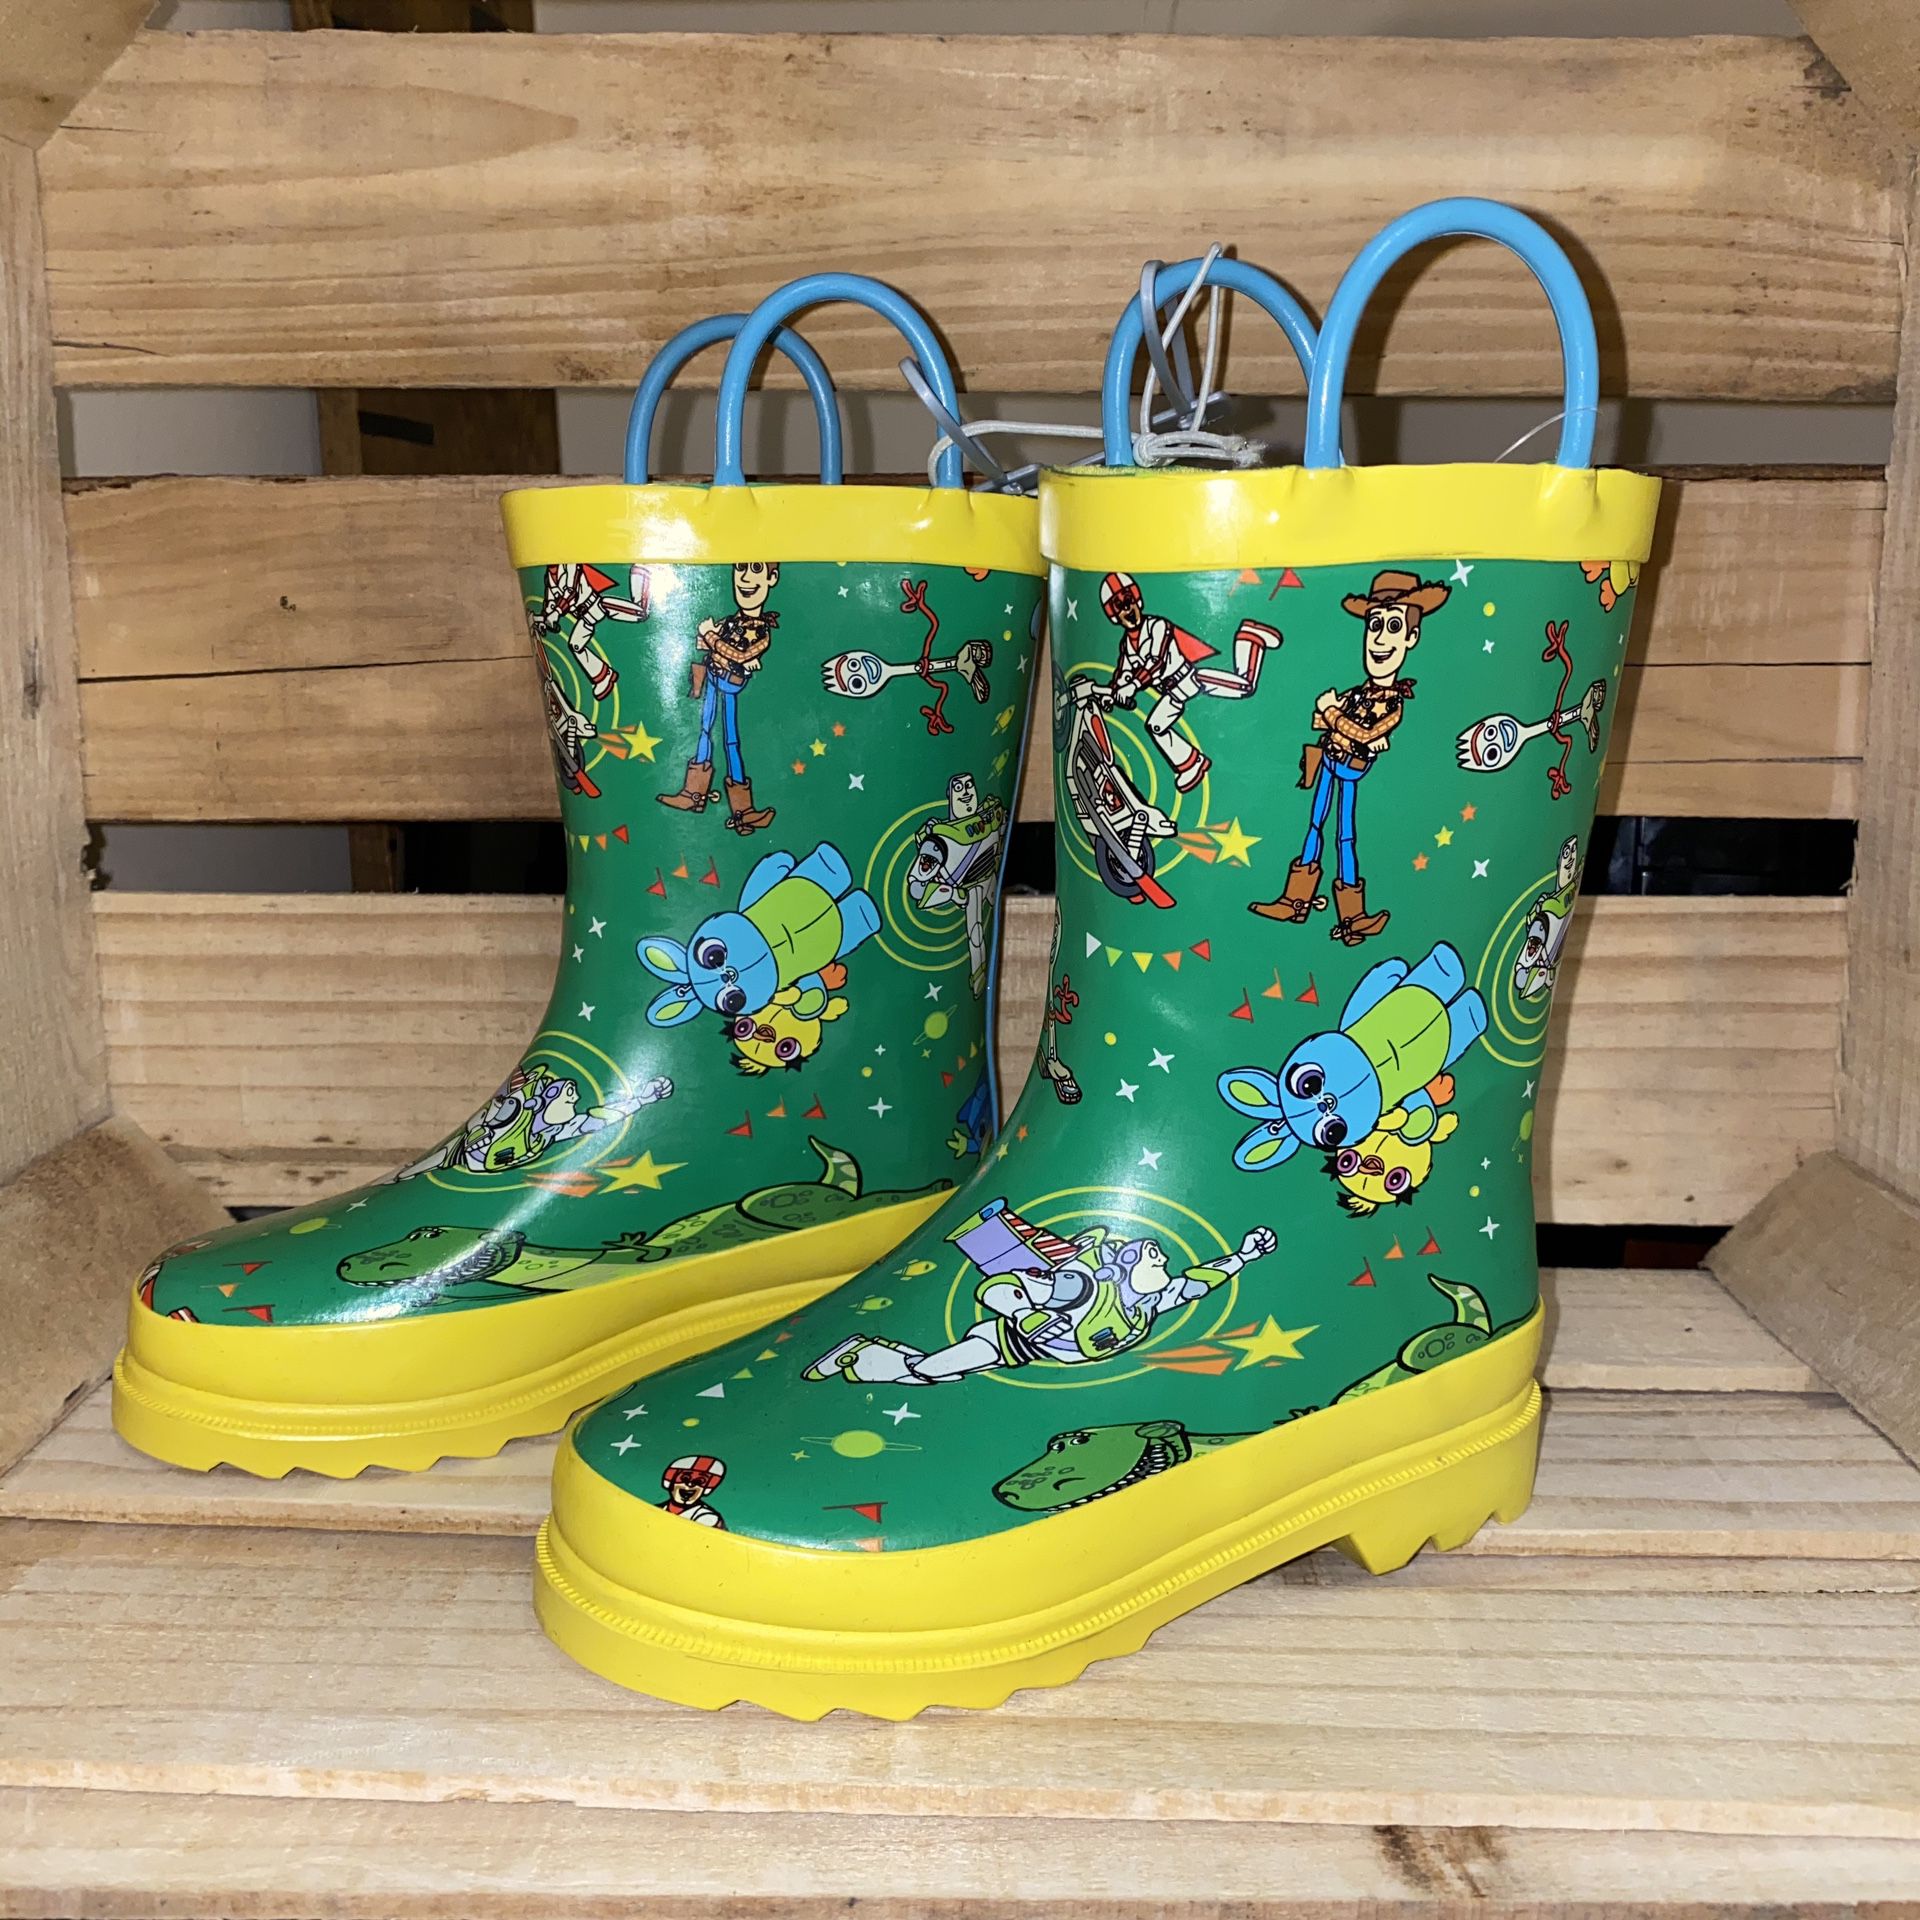 New You Story 4 Rain Boots Size 11